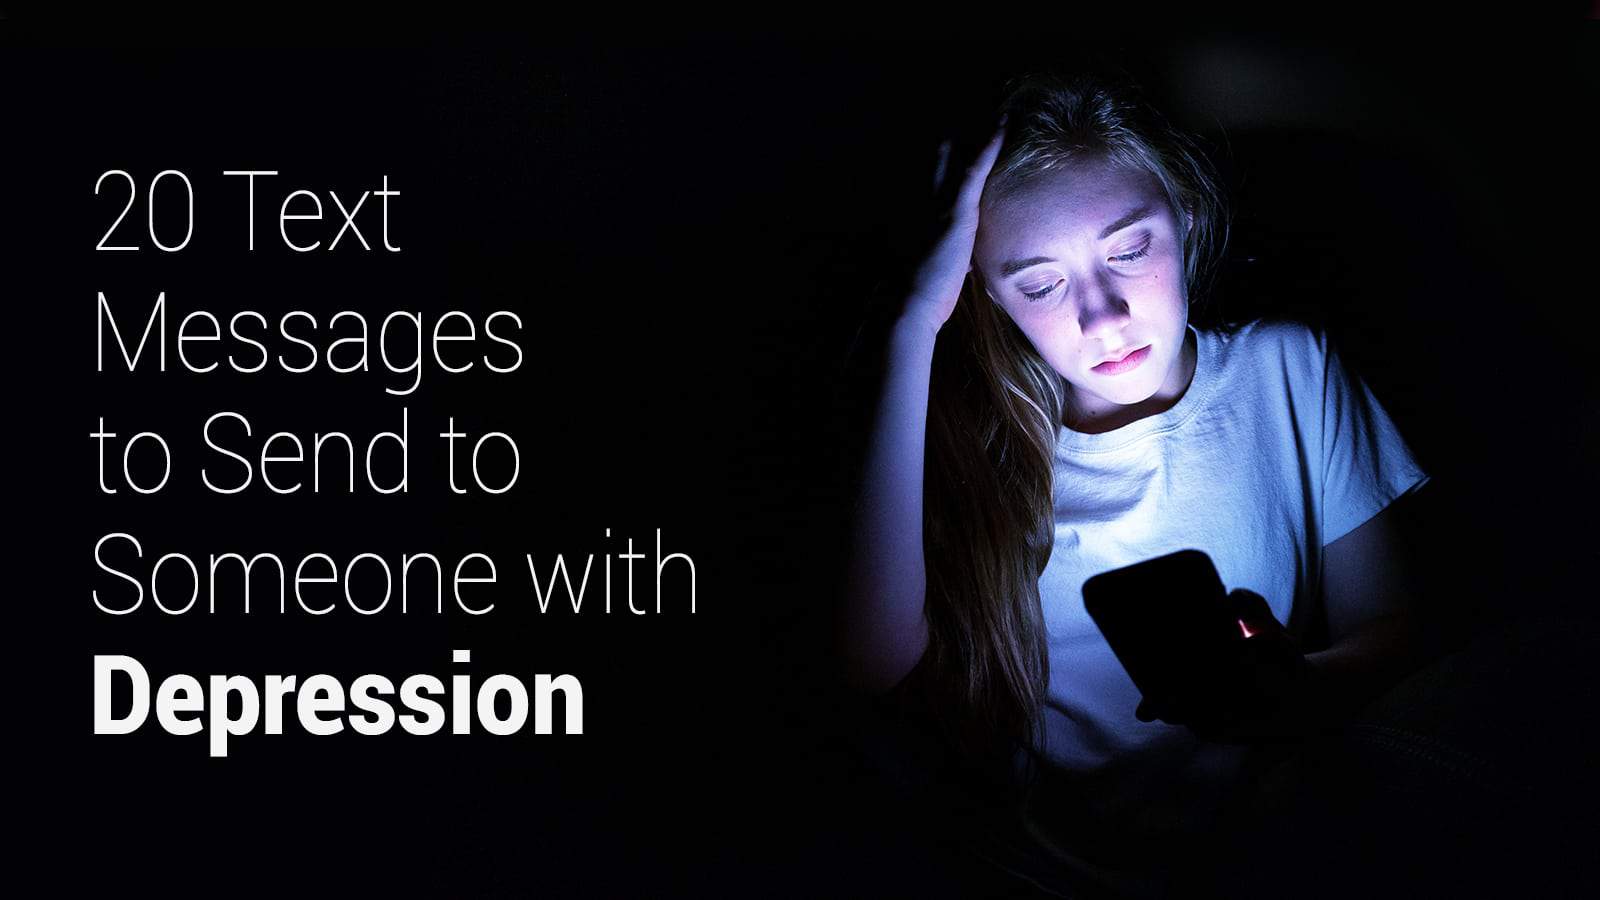 20 Text Messages to Send to Someone with Depression